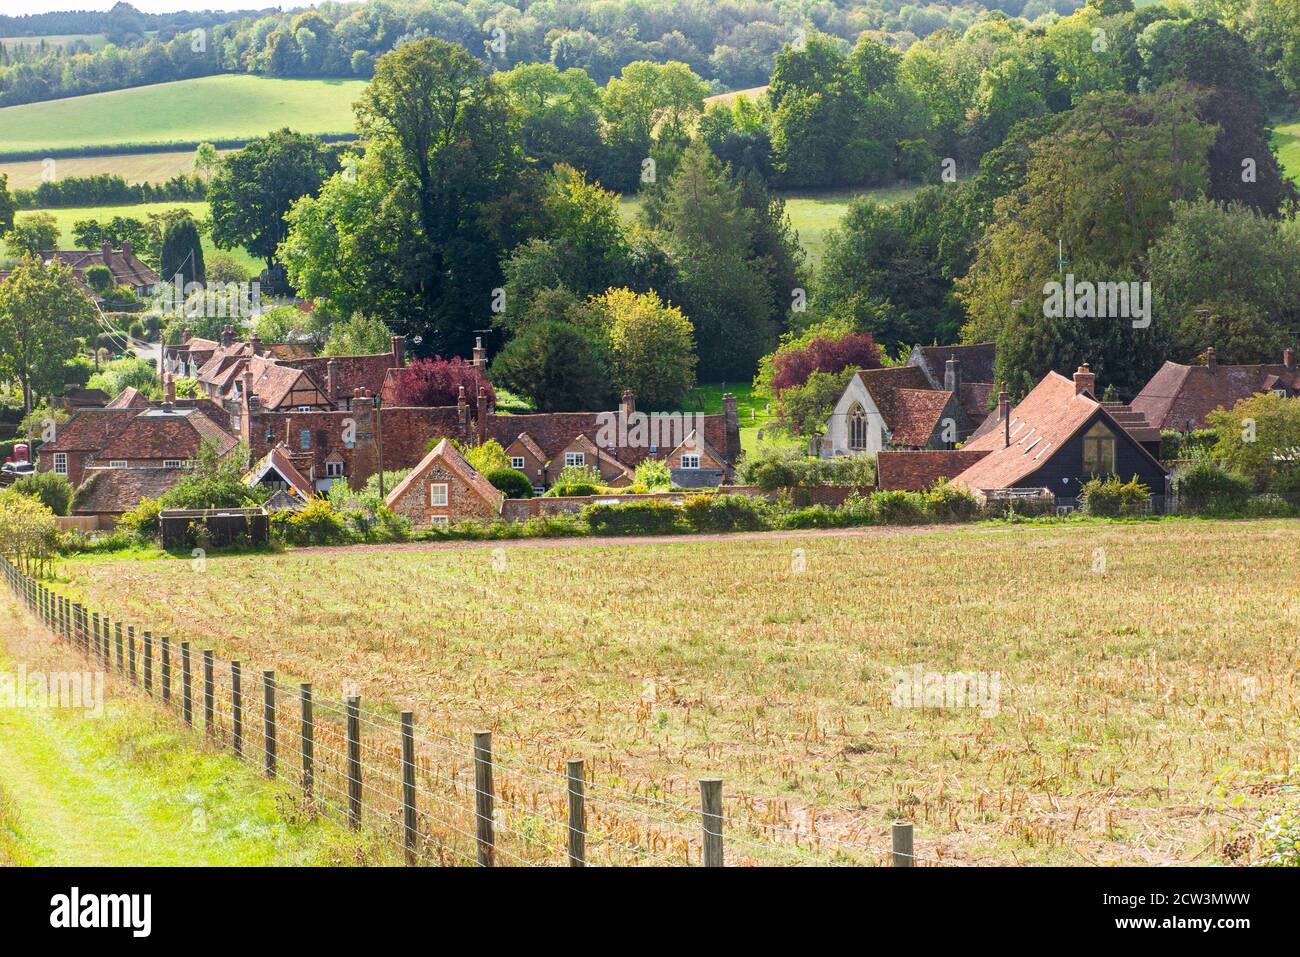 The village of Turville in Buckinghamshire - a quintessential English village, location of many films and television programmes Stock Photo